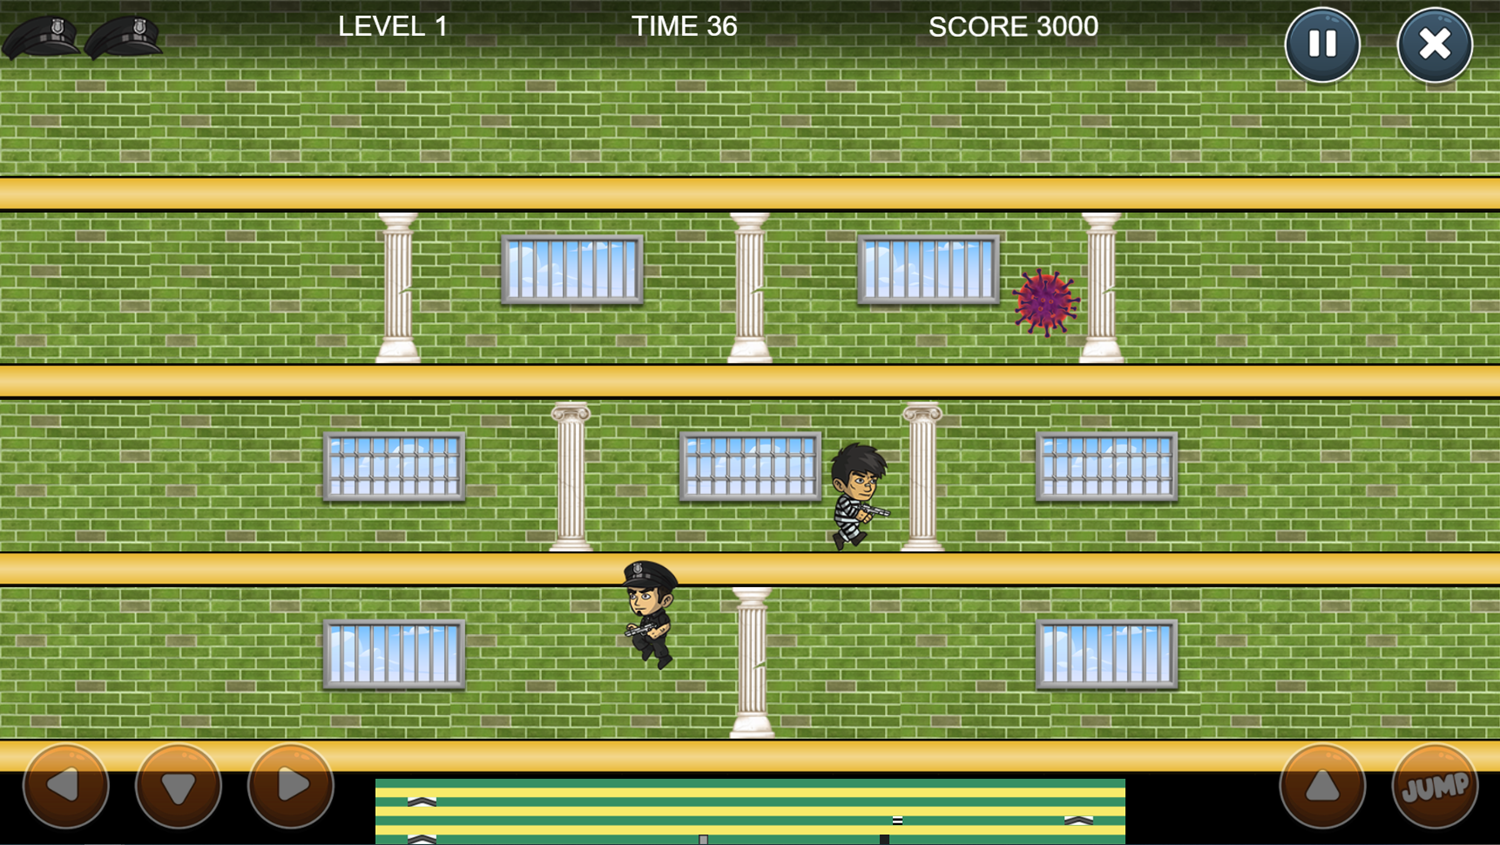 Police Chase Game Level Play Screenshot.